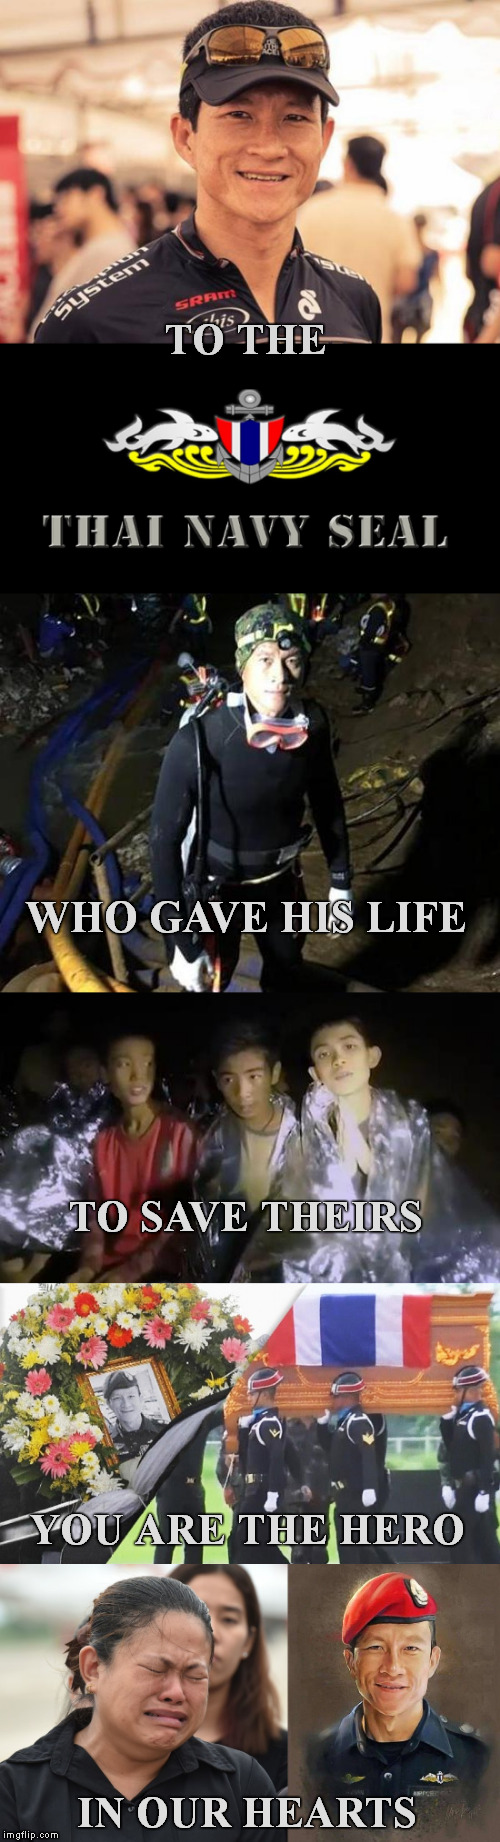 SALUTE | TO THE; WHO GAVE HIS LIFE; TO SAVE THEIRS; YOU ARE THE HERO; IN OUR HEARTS | image tagged in meme,saman gunan,thai soccer team,thailand boys,cave rescue | made w/ Imgflip meme maker